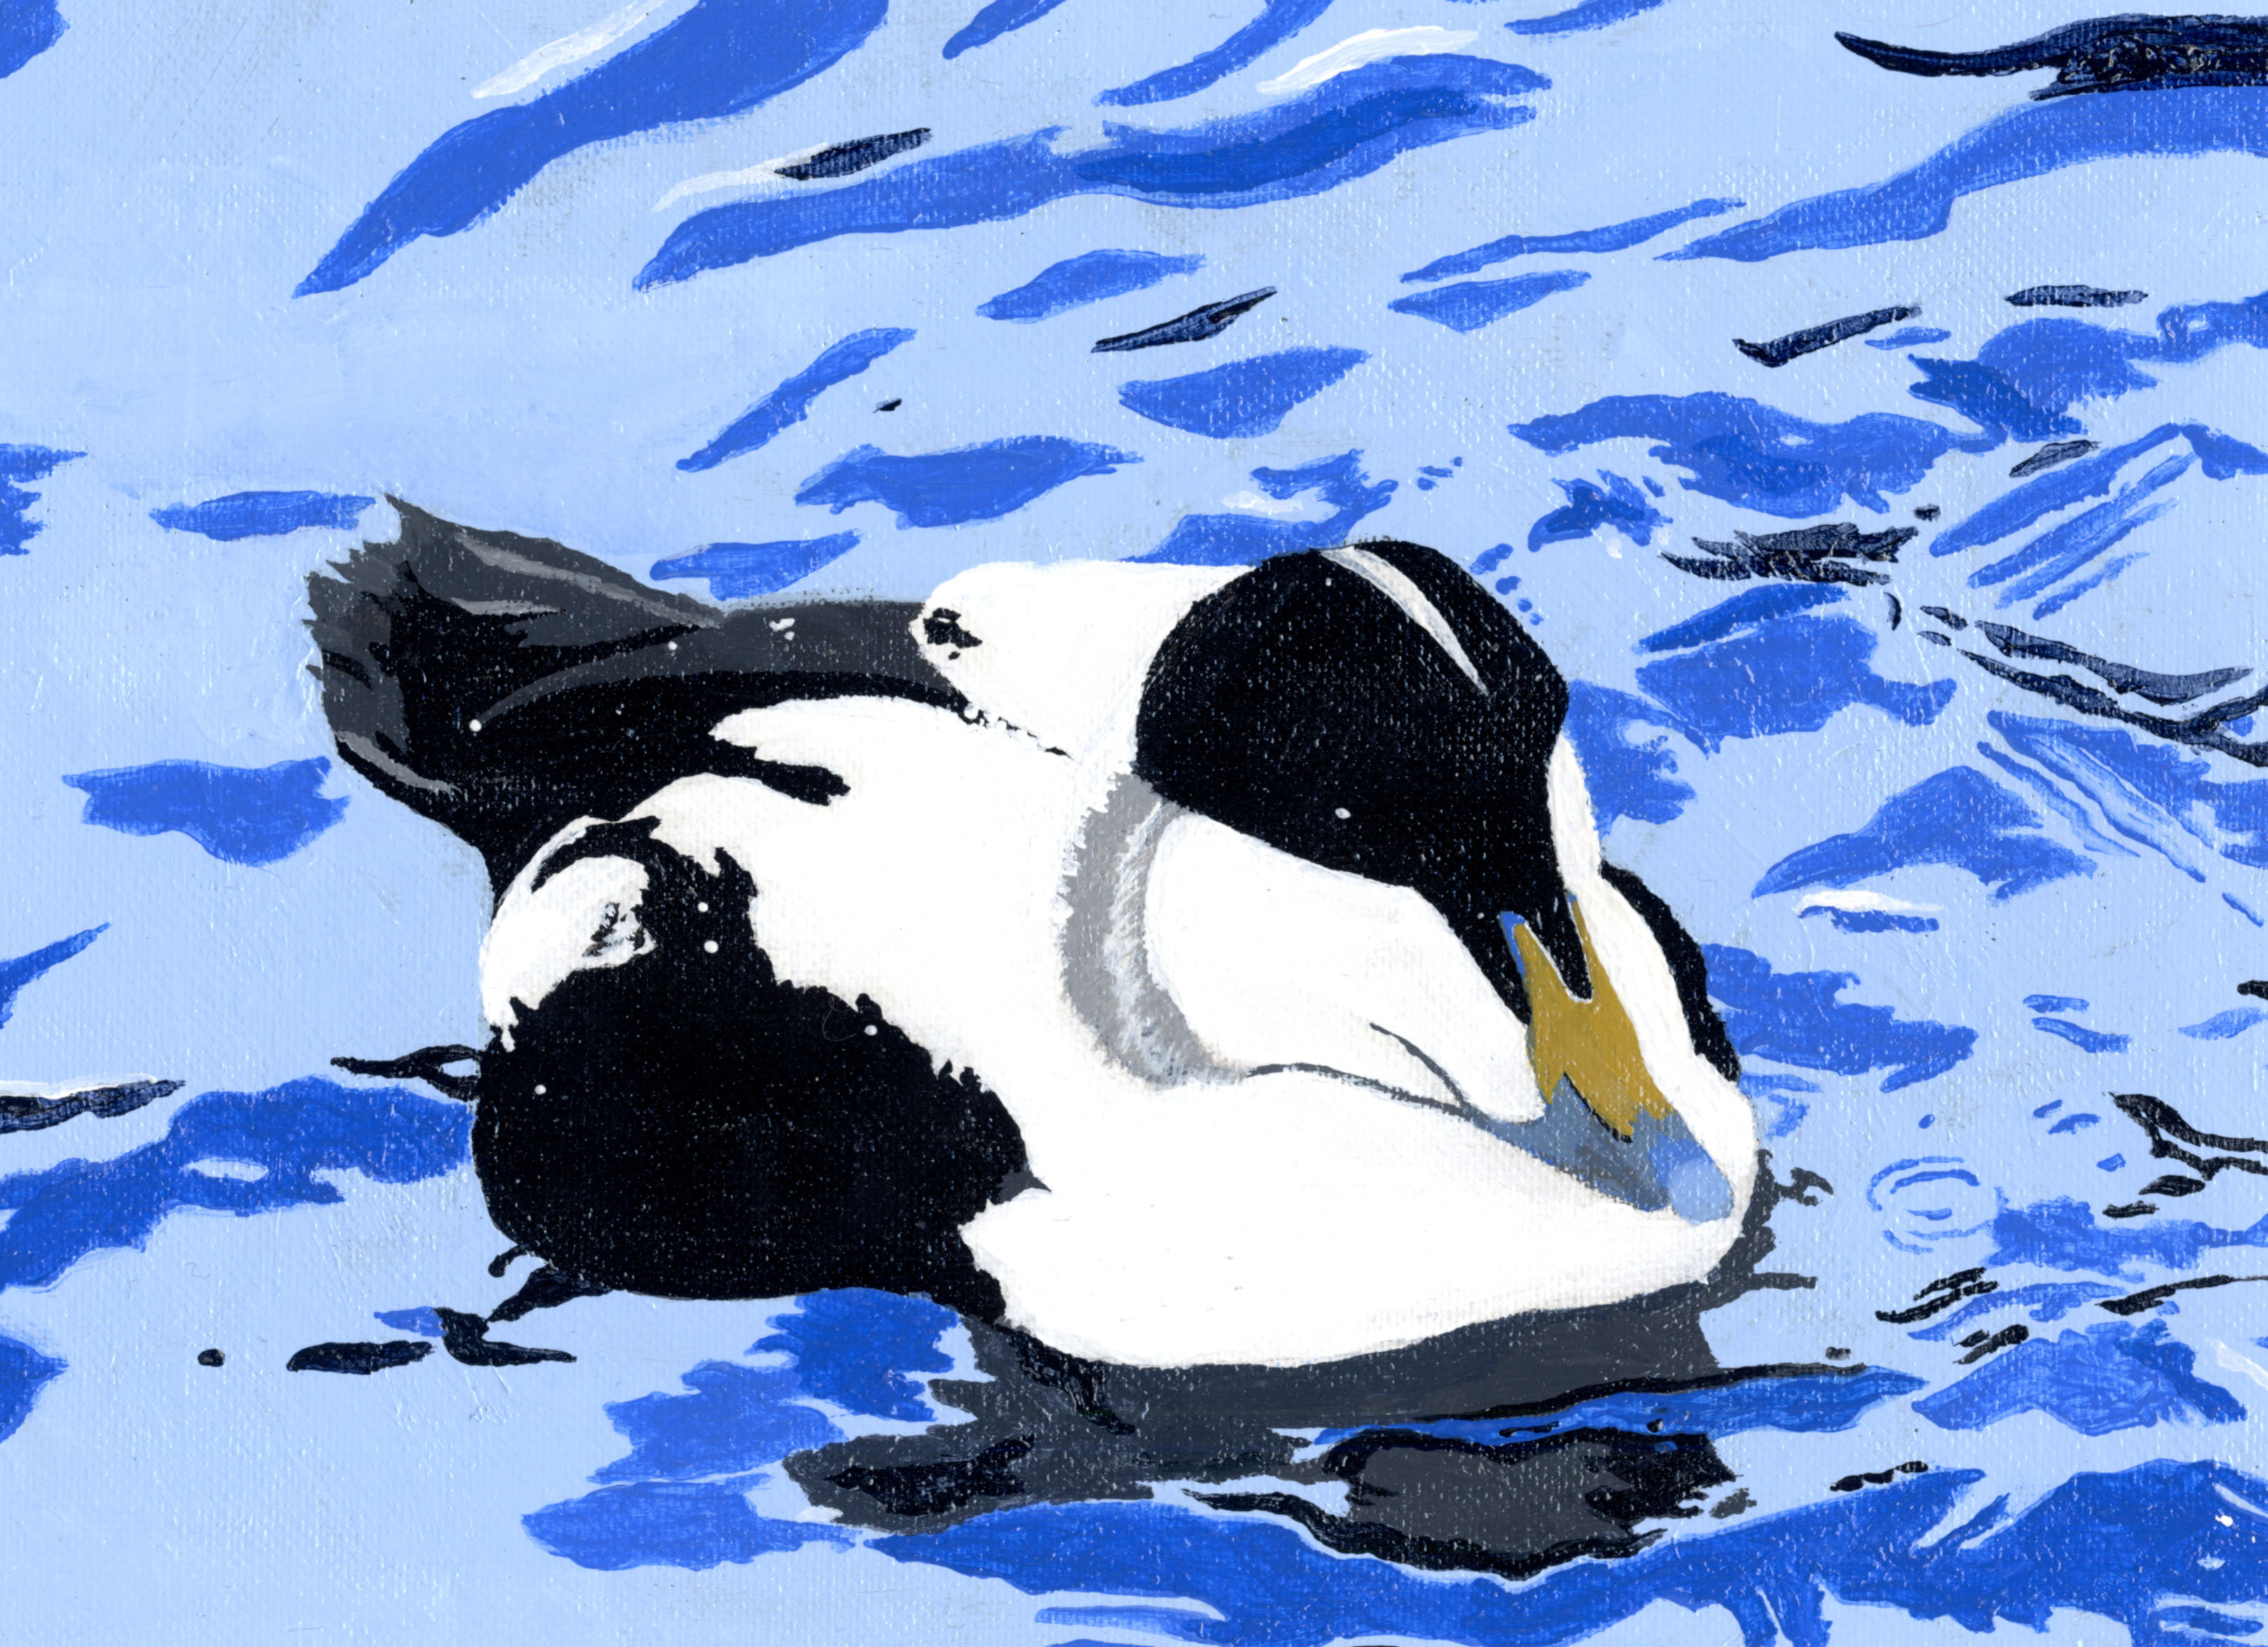 The finalist from Alaska for the 2011 Junior Duck Stamp Art Contest. (5610021420)